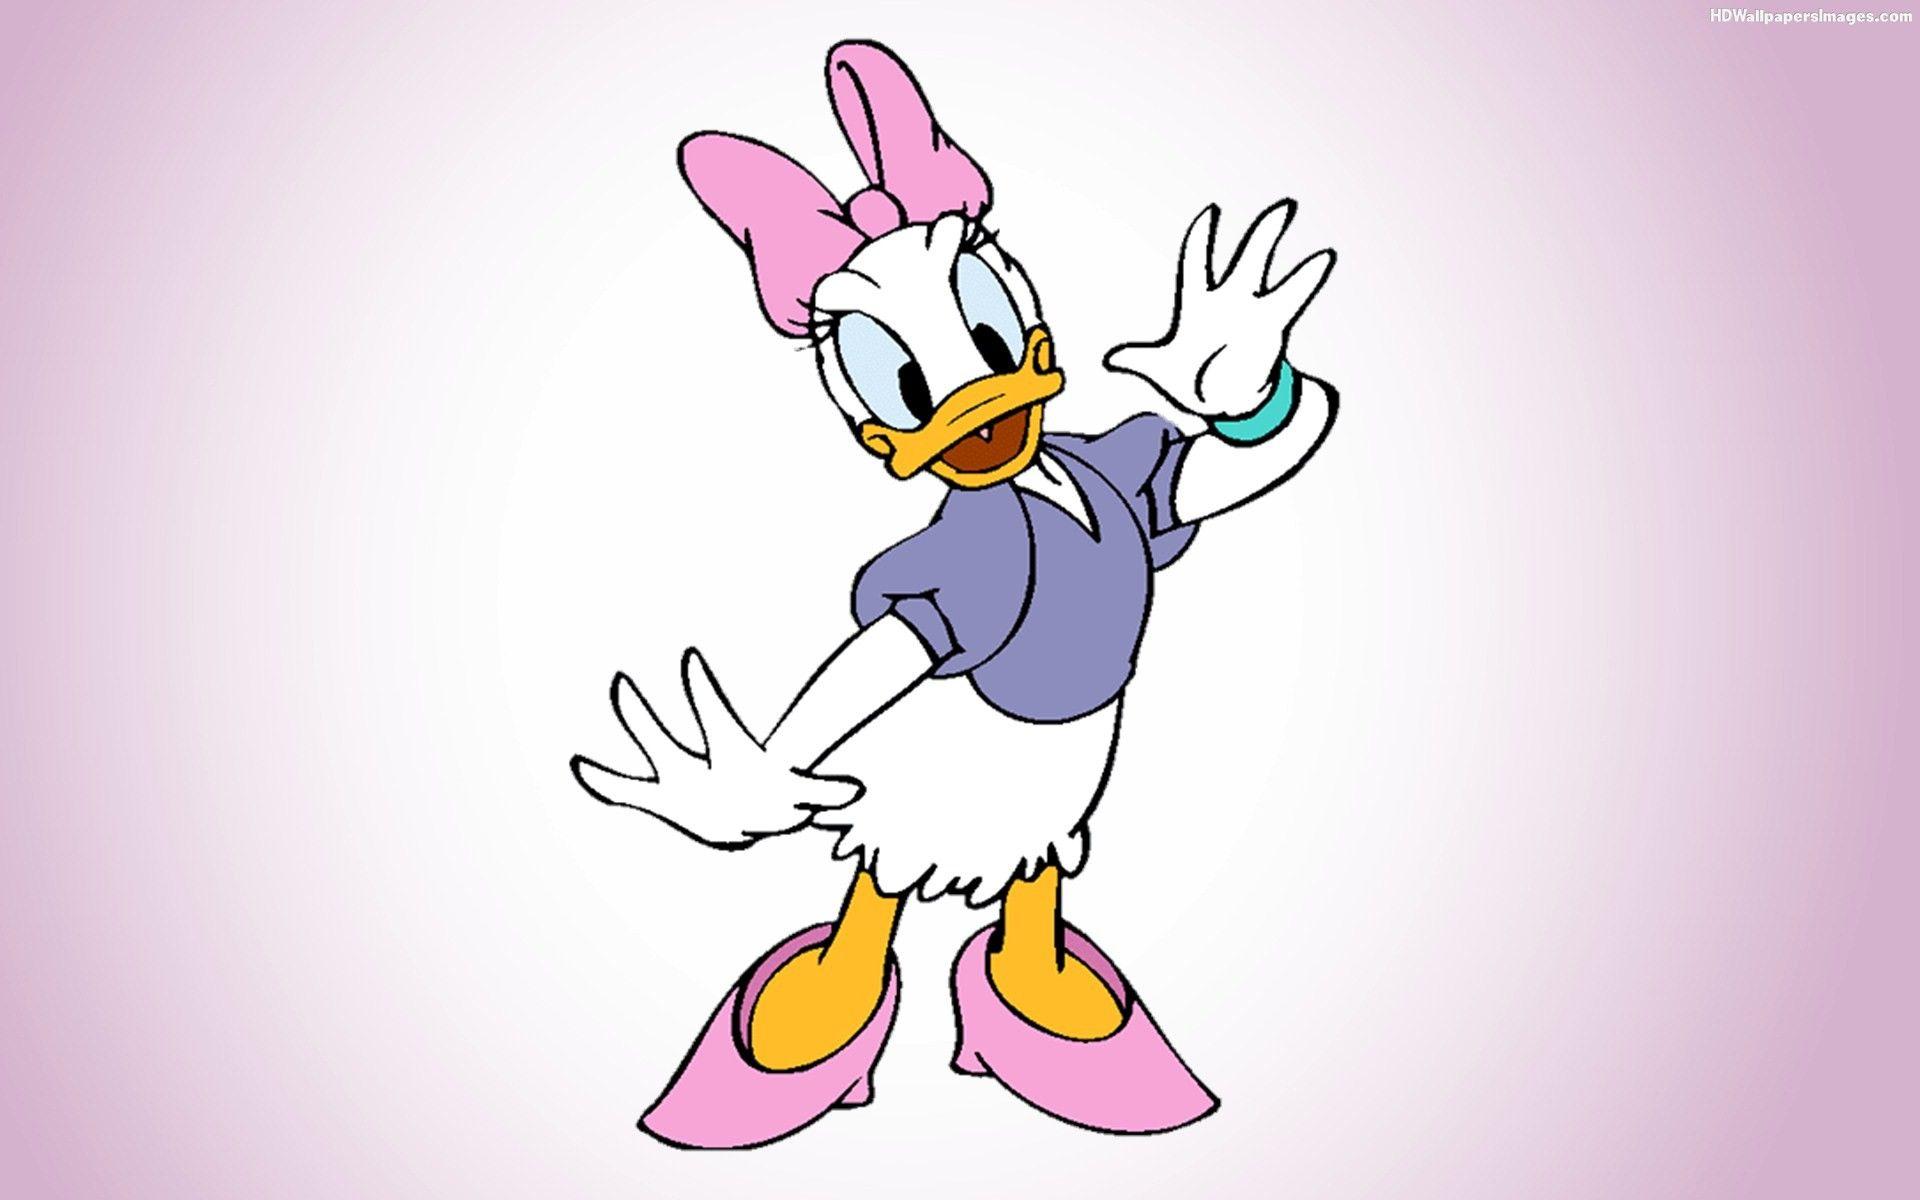 Donald Duck Is Curious By Magicalmerlingirl  Donald Duck Wallpaper Iphone  PNG Image  Transparent PNG Free Download on SeekPNG